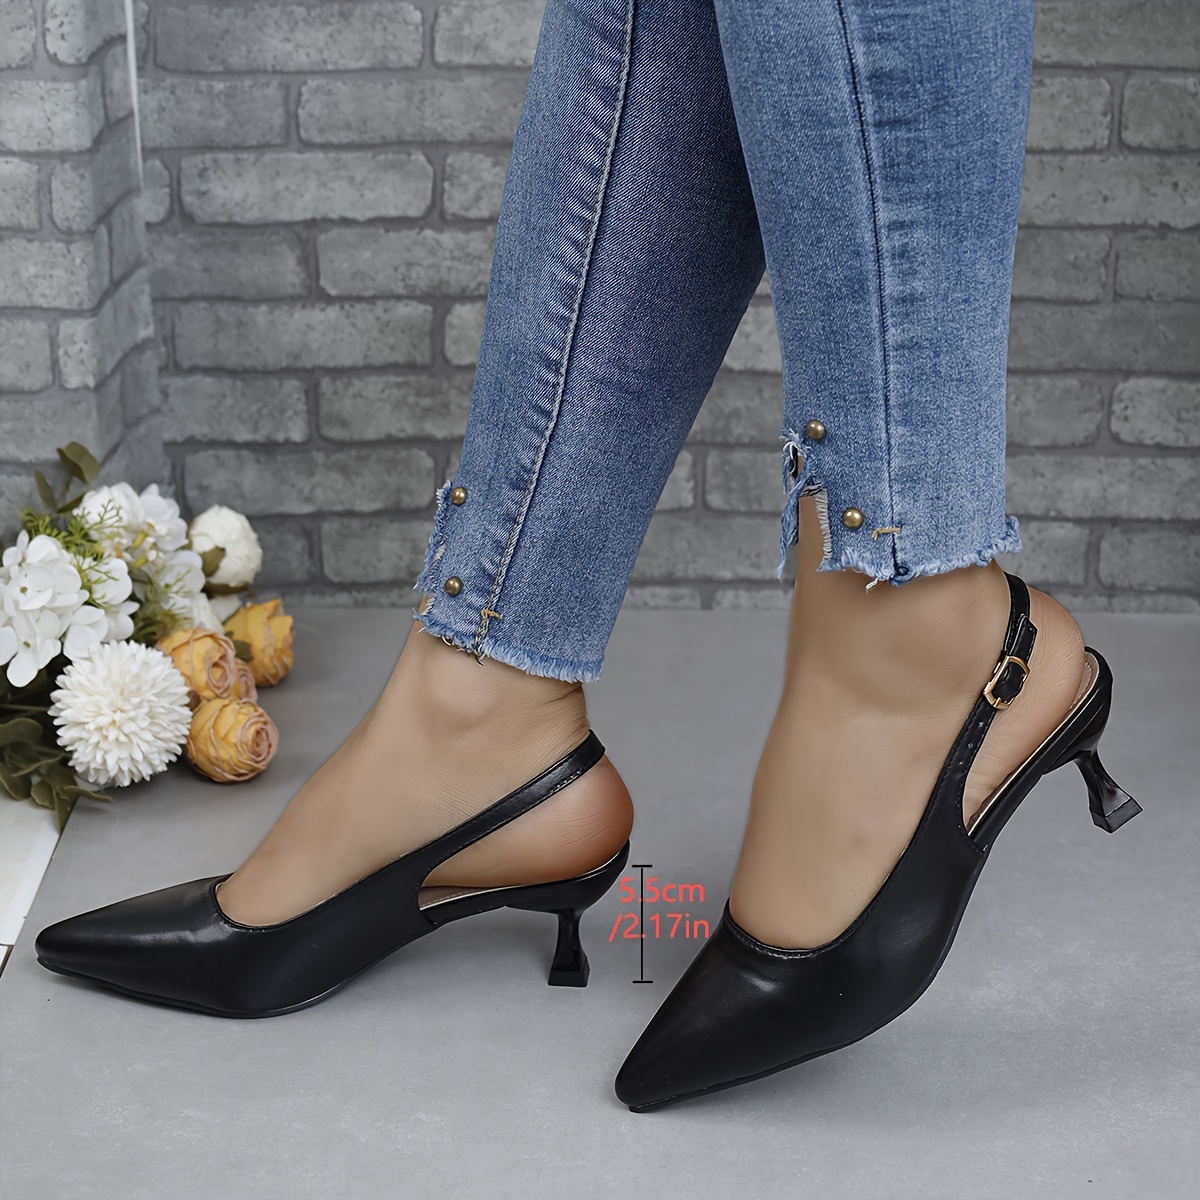 

Women's Solid Color Stylish Sandals, Ankle Buckle Strap Slip On Slingback Versatile Shoes, Point Toe Party Shoes